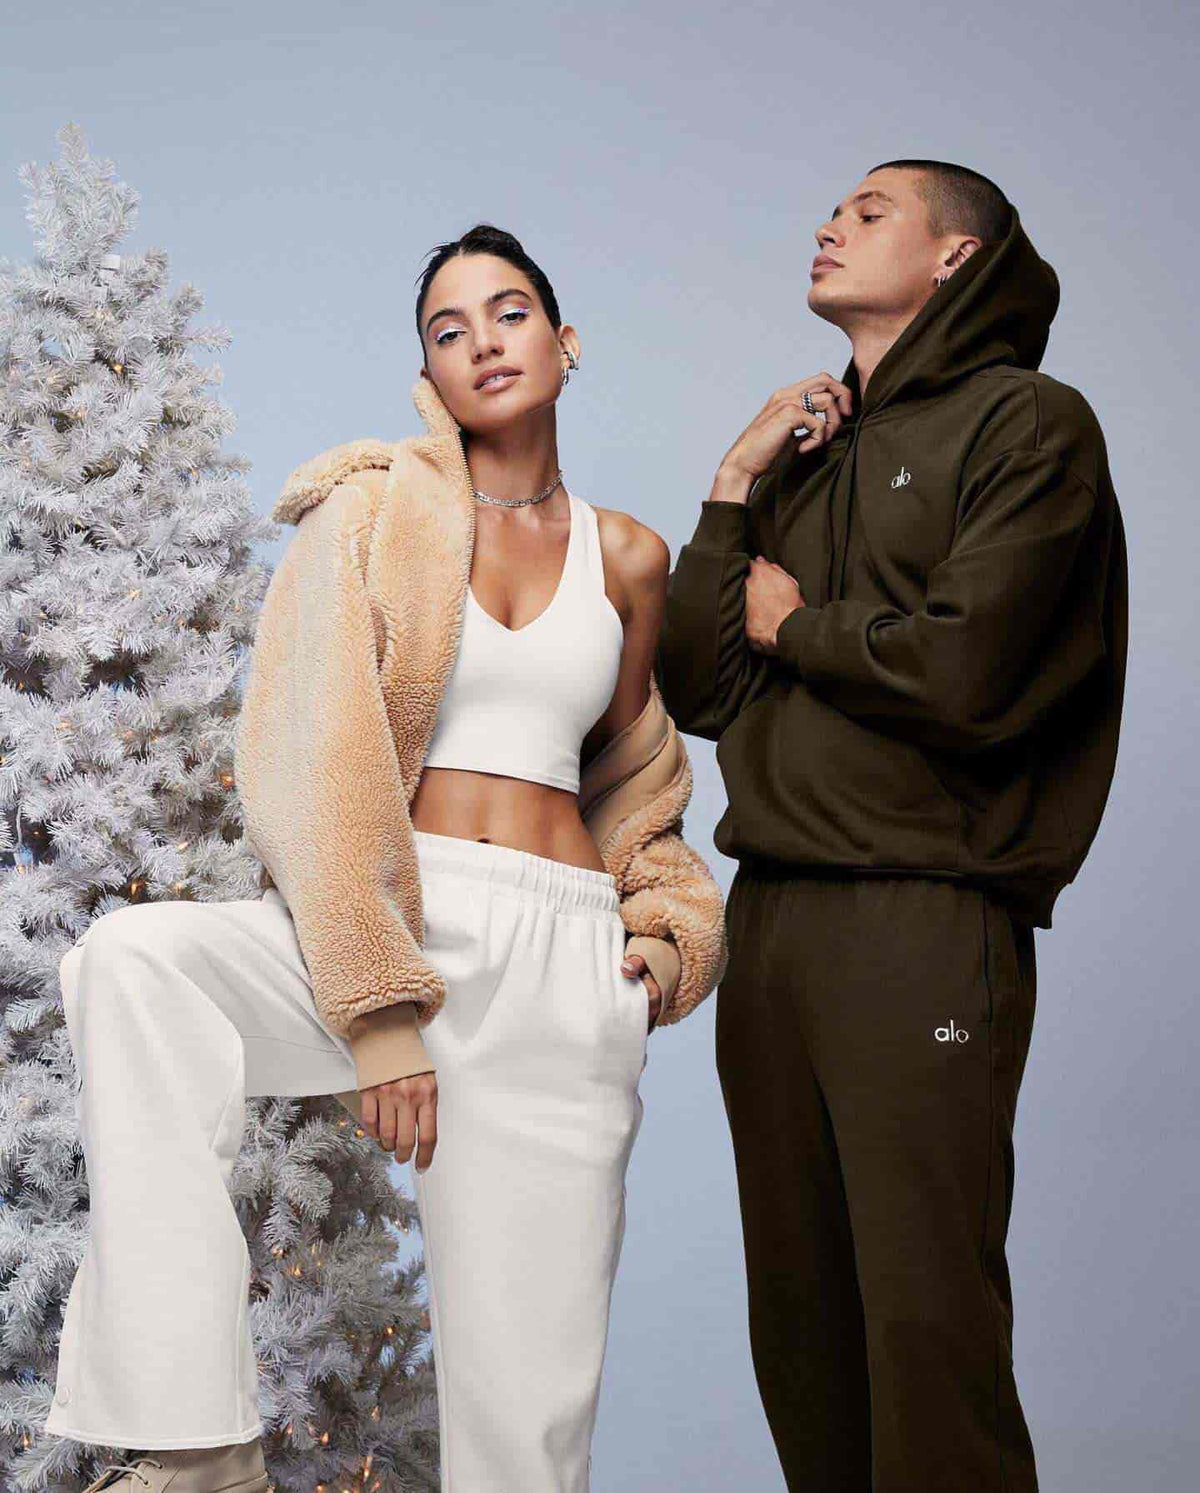 A man and a woman standing against a grey background and a frosted pine tree while bundled up in Alo Yoga's cozy loungewear posing for the camera.  